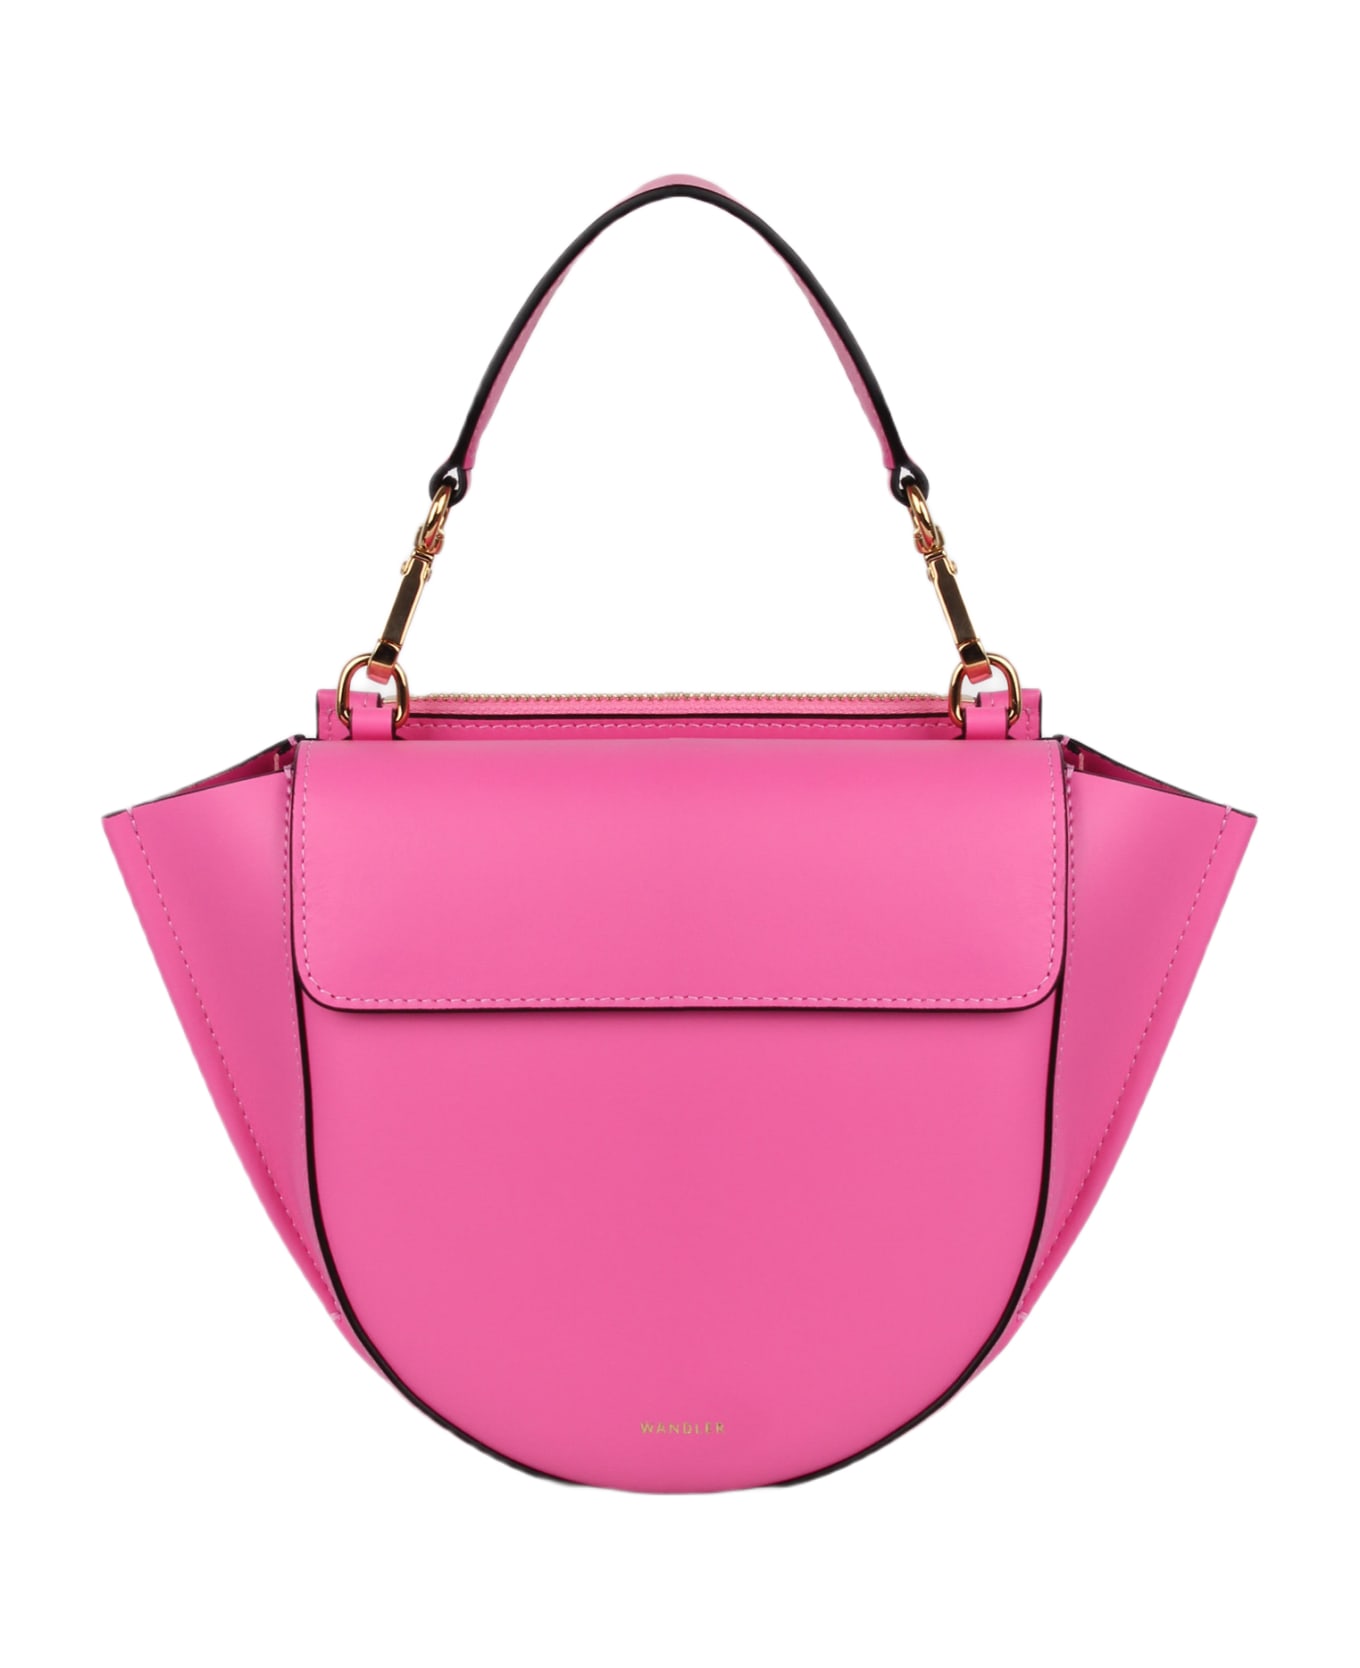 Wandler Small Hortensia Leather Bag